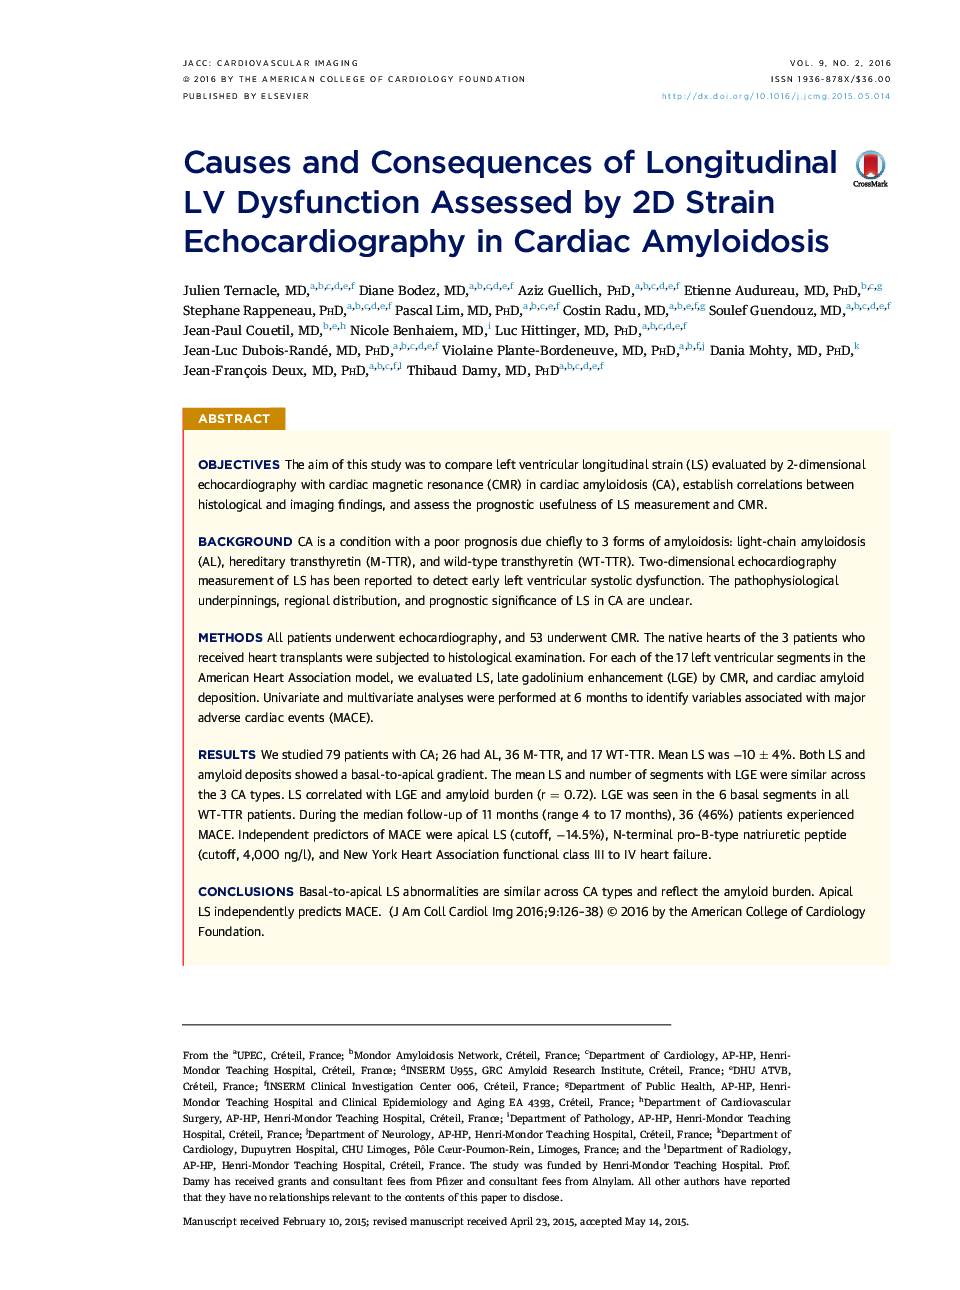 Causes and Consequences of Longitudinal LV Dysfunction Assessed by 2D Strain Echocardiography in Cardiac Amyloidosis 